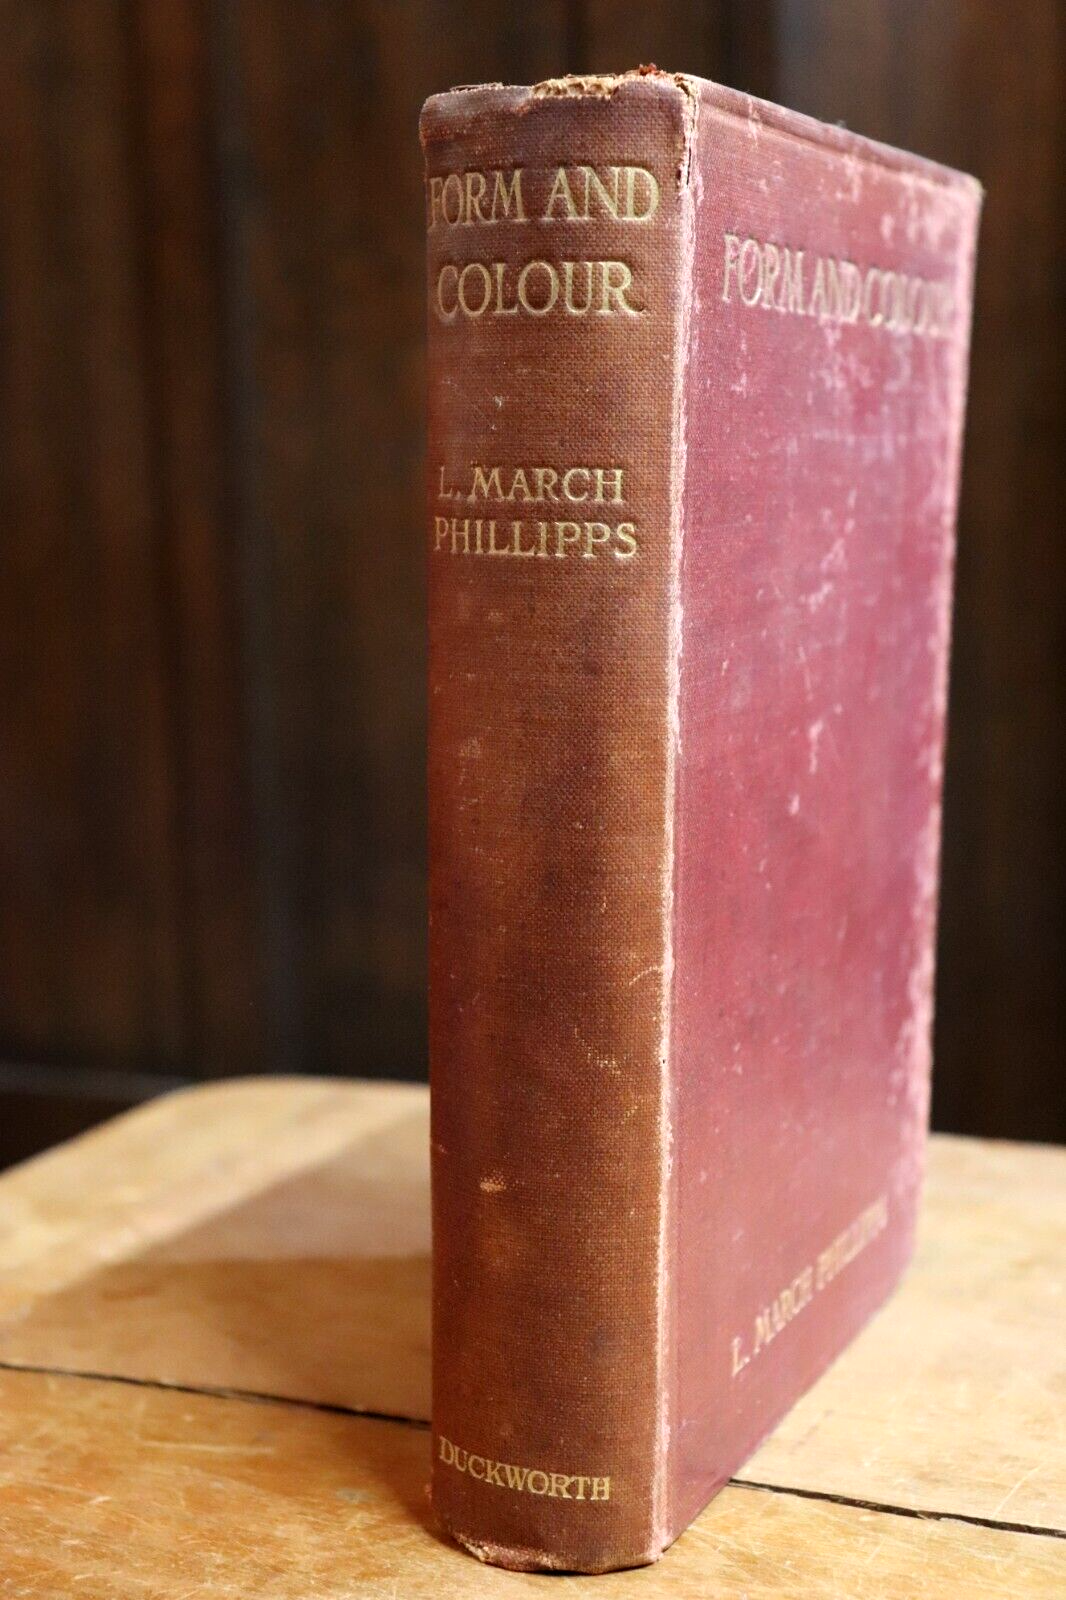 Form & Colour by LM Phillipps - 1915 - Scarce Architectural Book 1st Edition